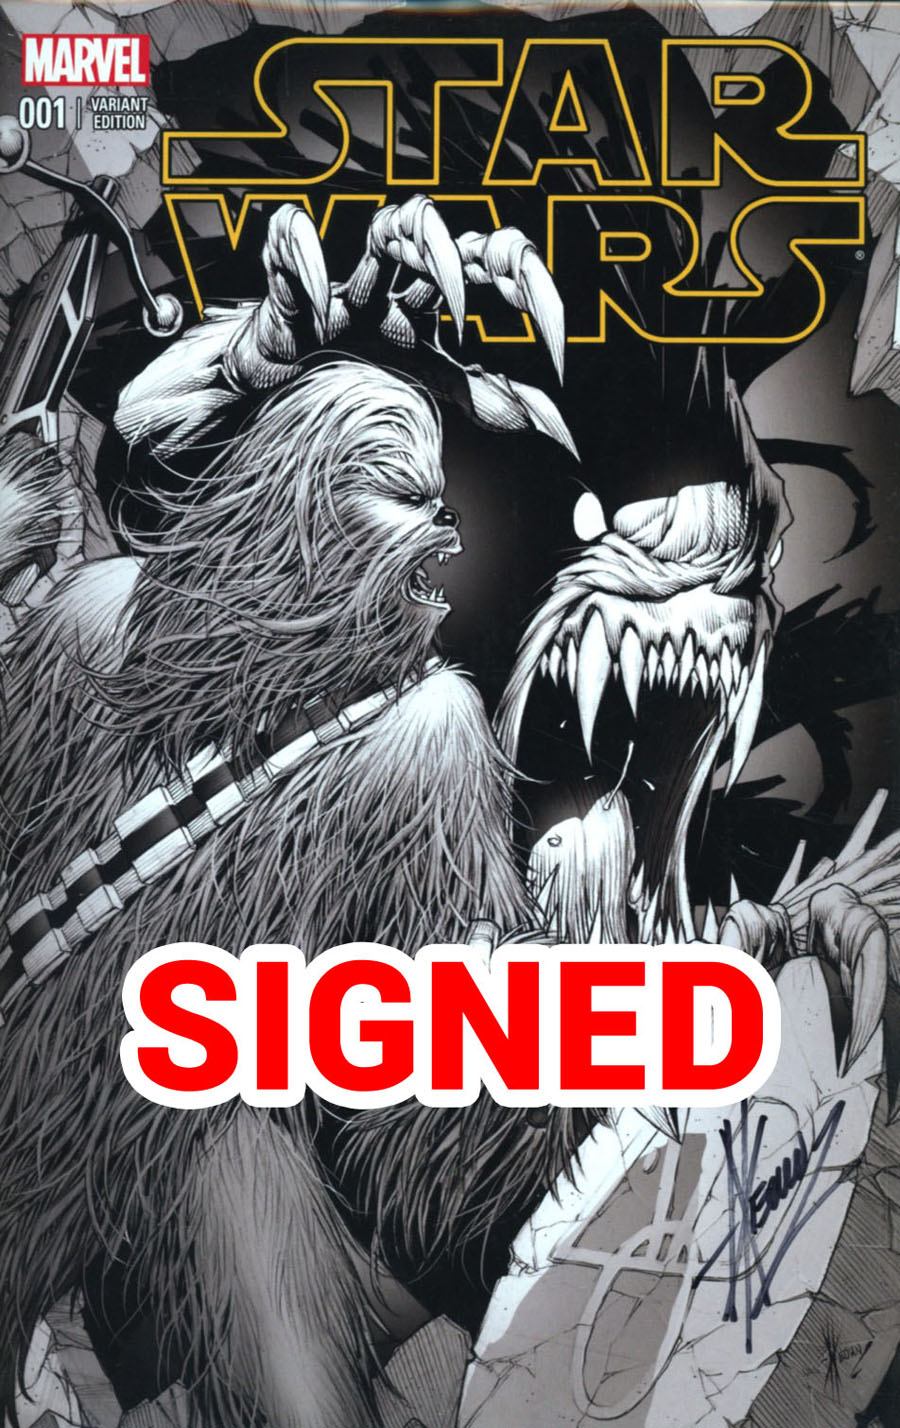 Star Wars Vol 4 #1 Cover Z-Z-Z-F DF AOD Exclusive Dale Keown Black & White Variant Cover Signed By Dale Keown